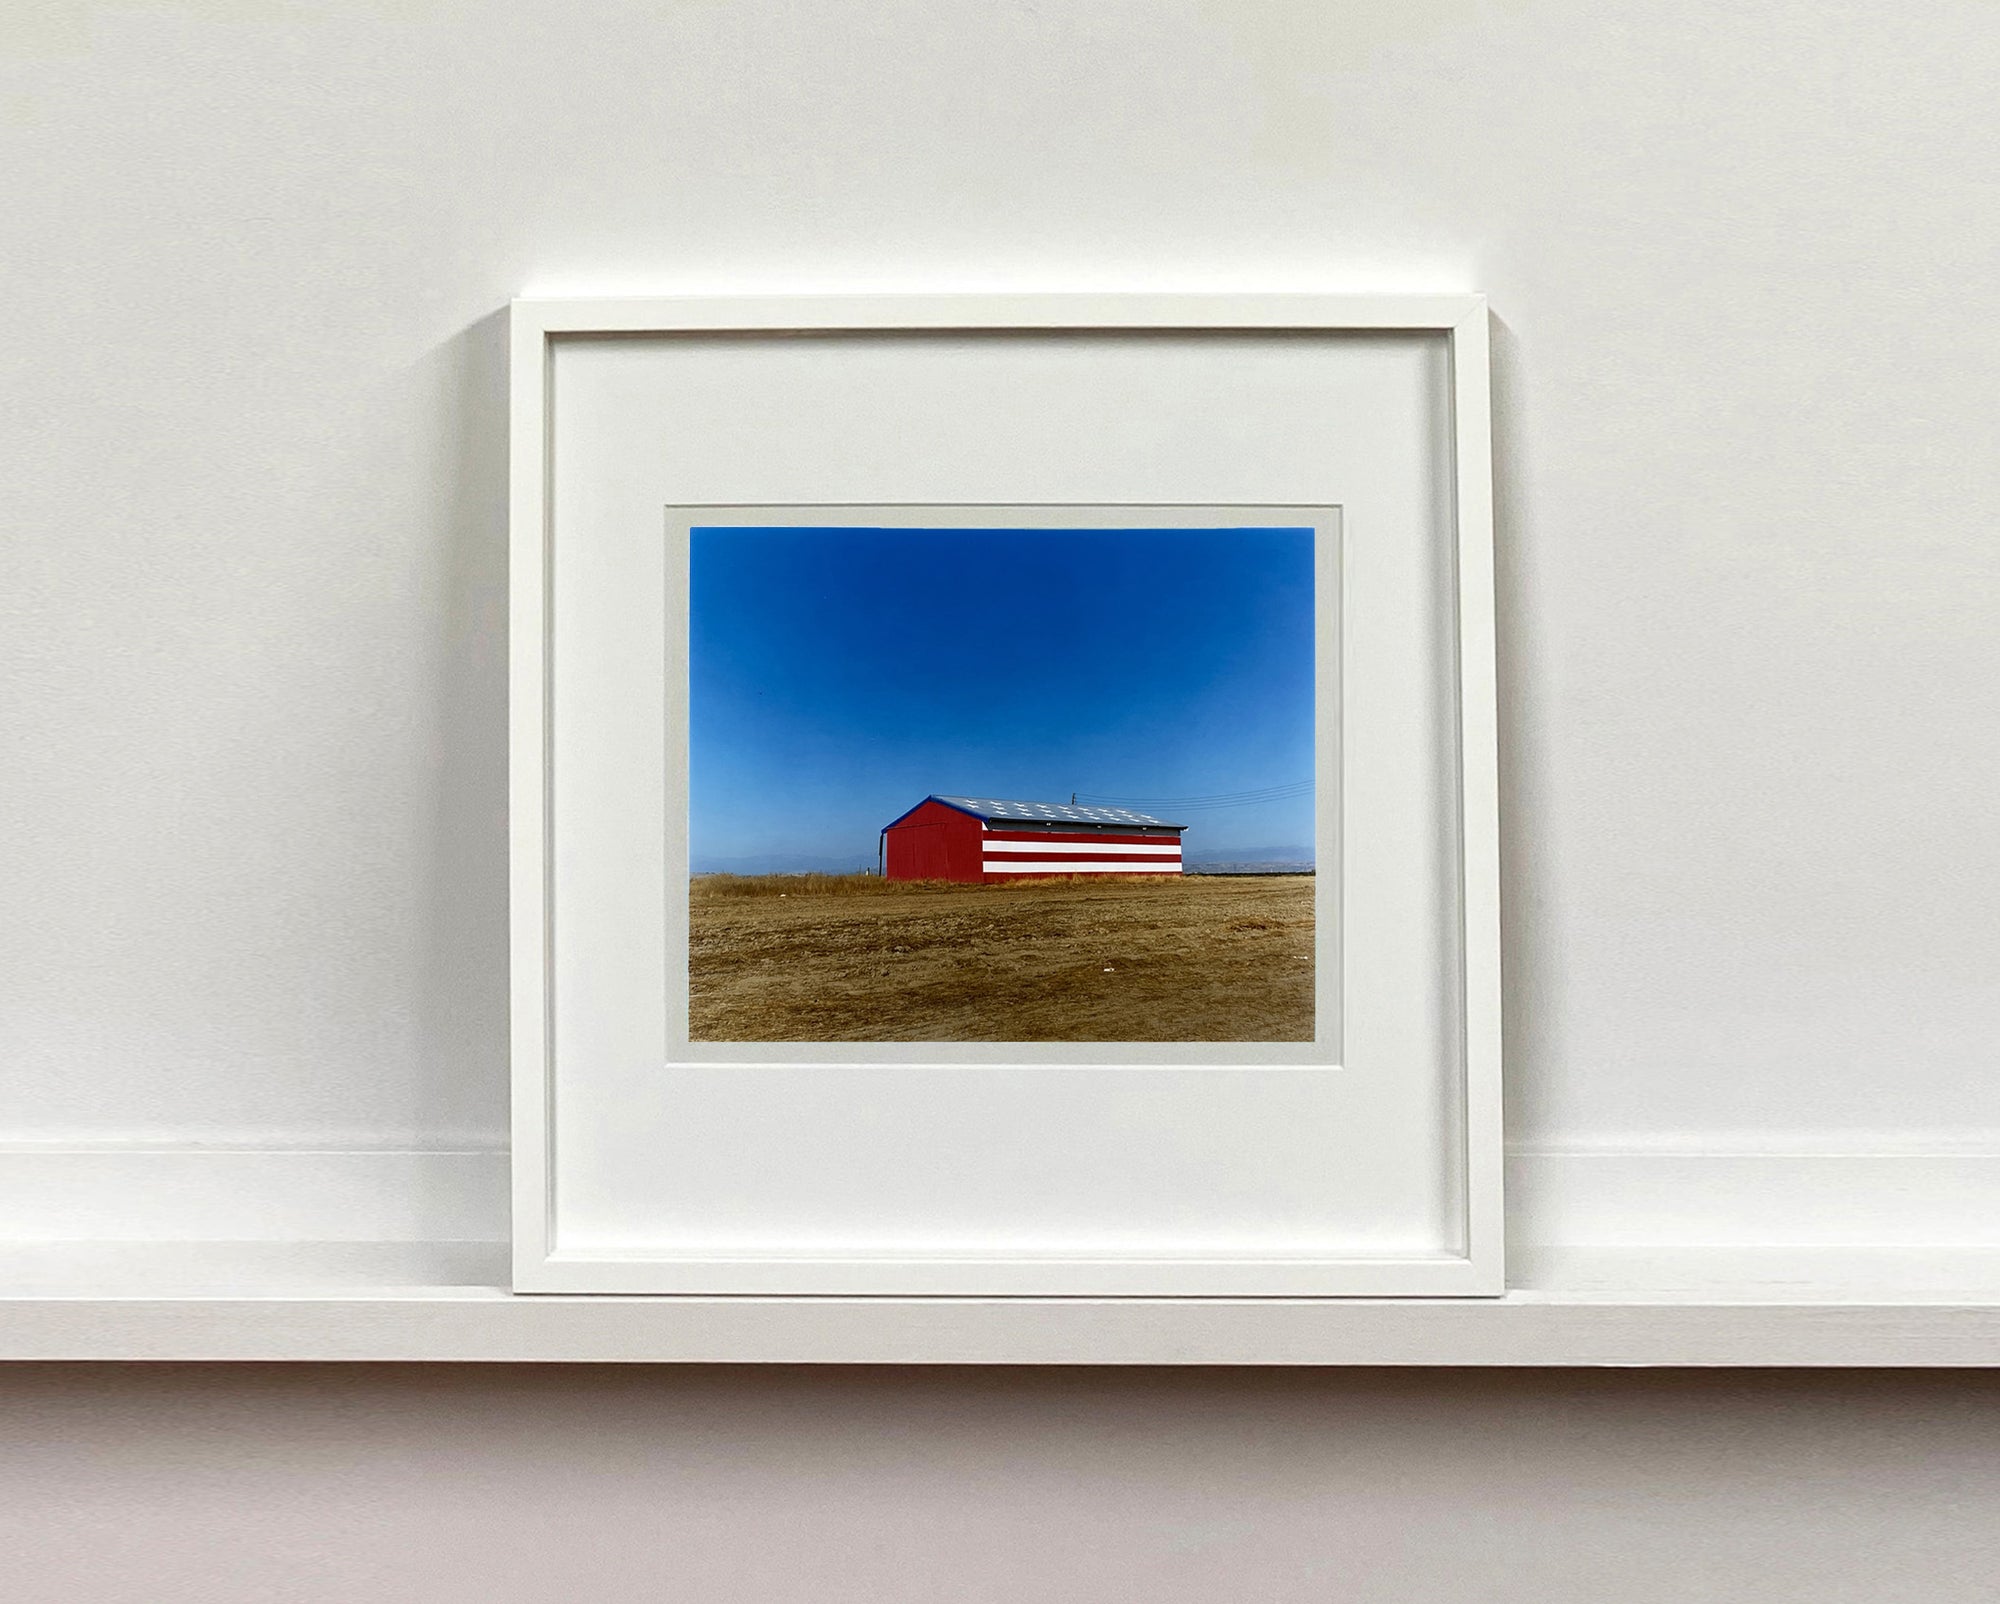 'Stars & Stripes Barn' shows a depiction of the American flag painted on this building in Oakhurst, California. It sits on the horizon against a vast blue sky. This artwork is part of Richard Heeps' 'Dream in Colour' series.